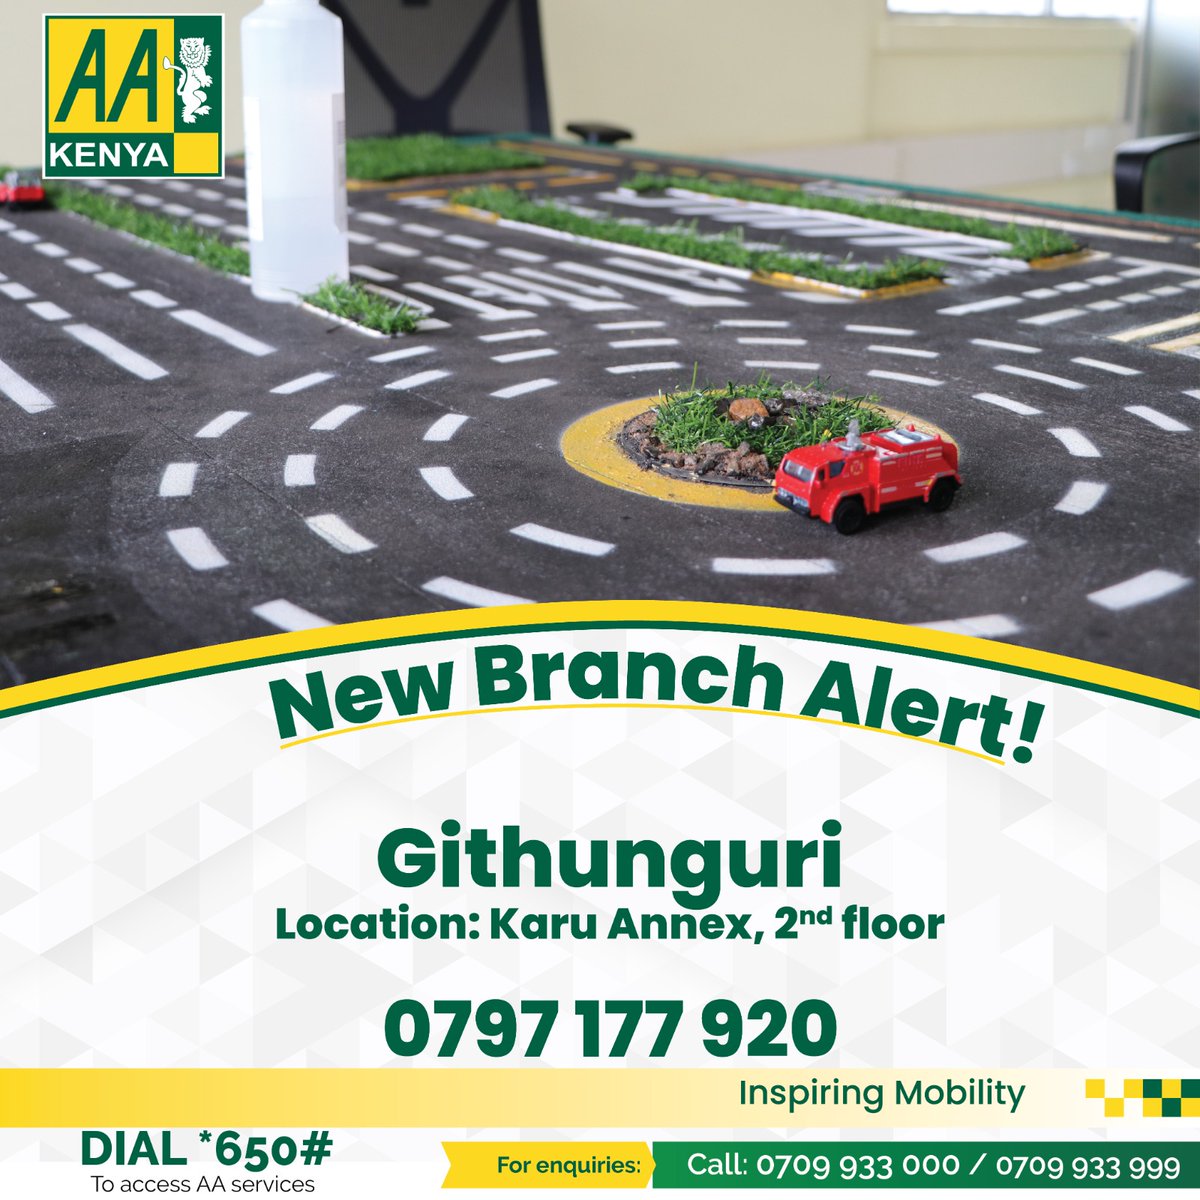 Githunguri, AA Kenya is here for you! Our new branch is officially open and ready to provide you with exceptional products and services. We are located at Karu Annex, 2nd Floor. For more info, call us on 0797177920/0709933000
#AAKenyacares #InspiringMobility